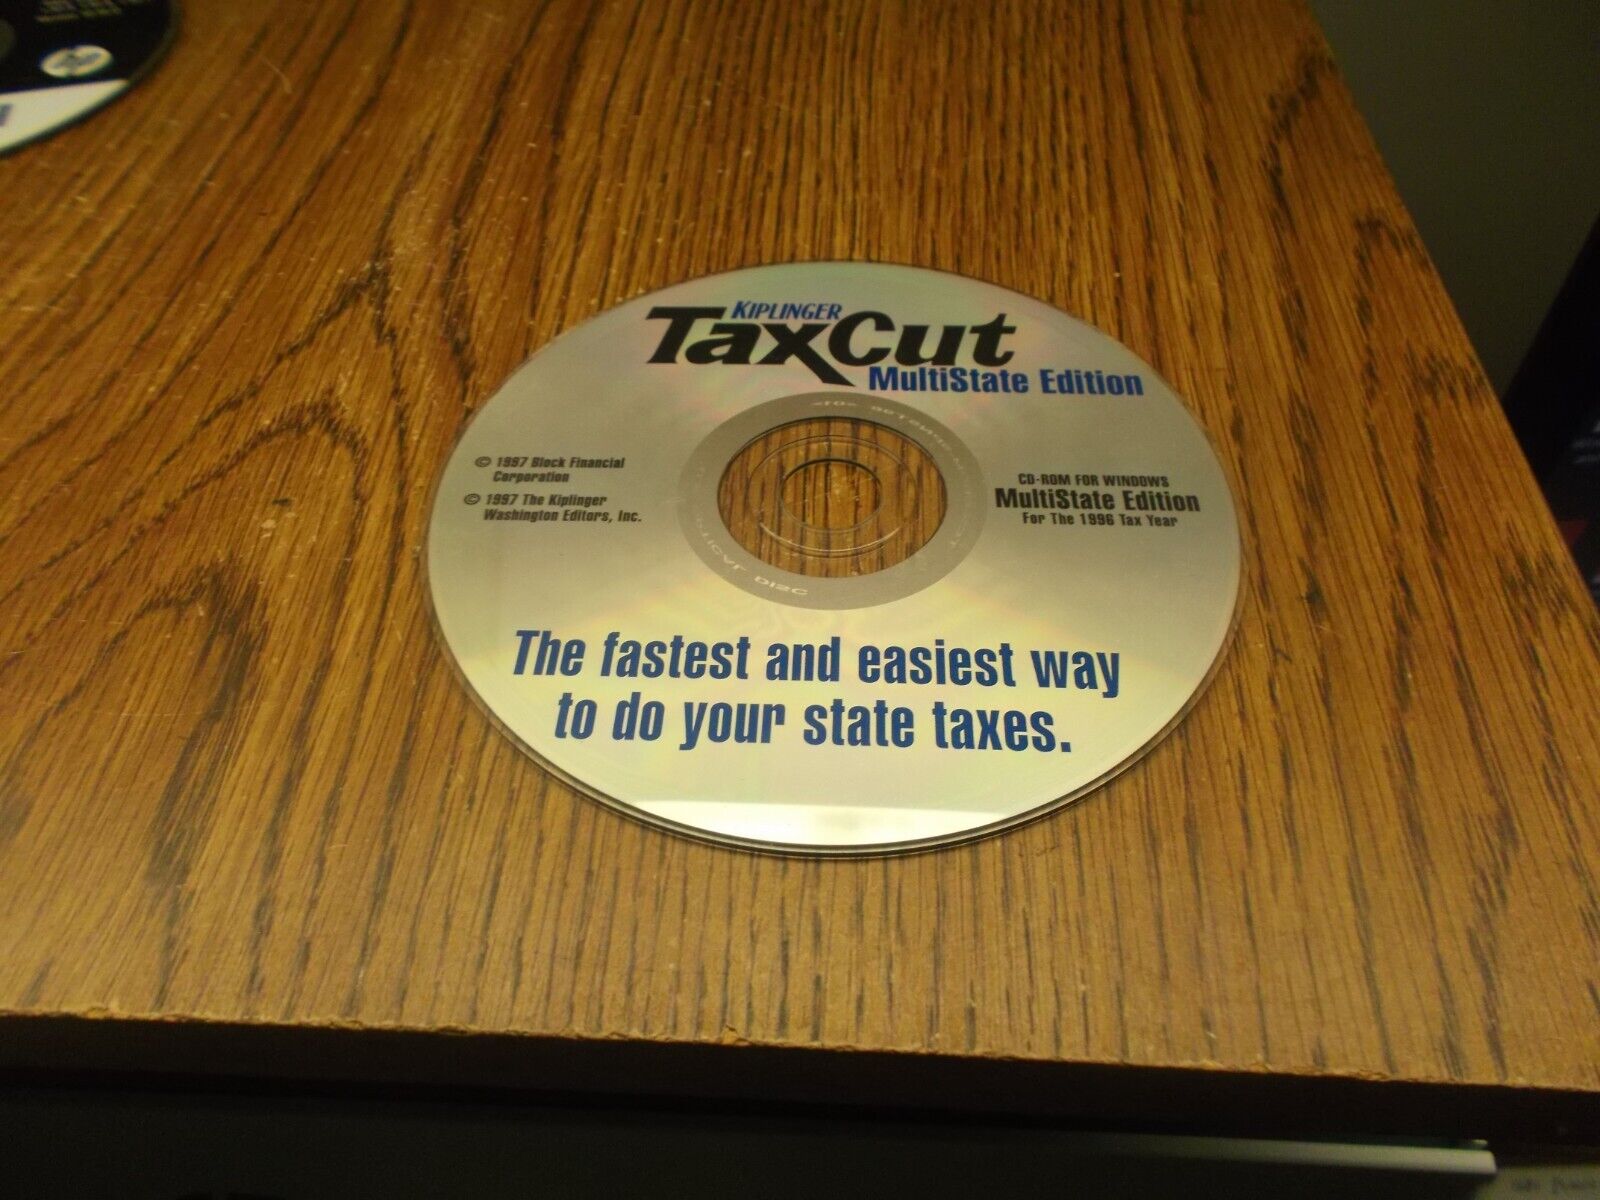 LKE NEW H&R BLOCK TAXCUT STATE FEDERAL 1996,2002,2003,2004,2005,2006 DISC ONLY